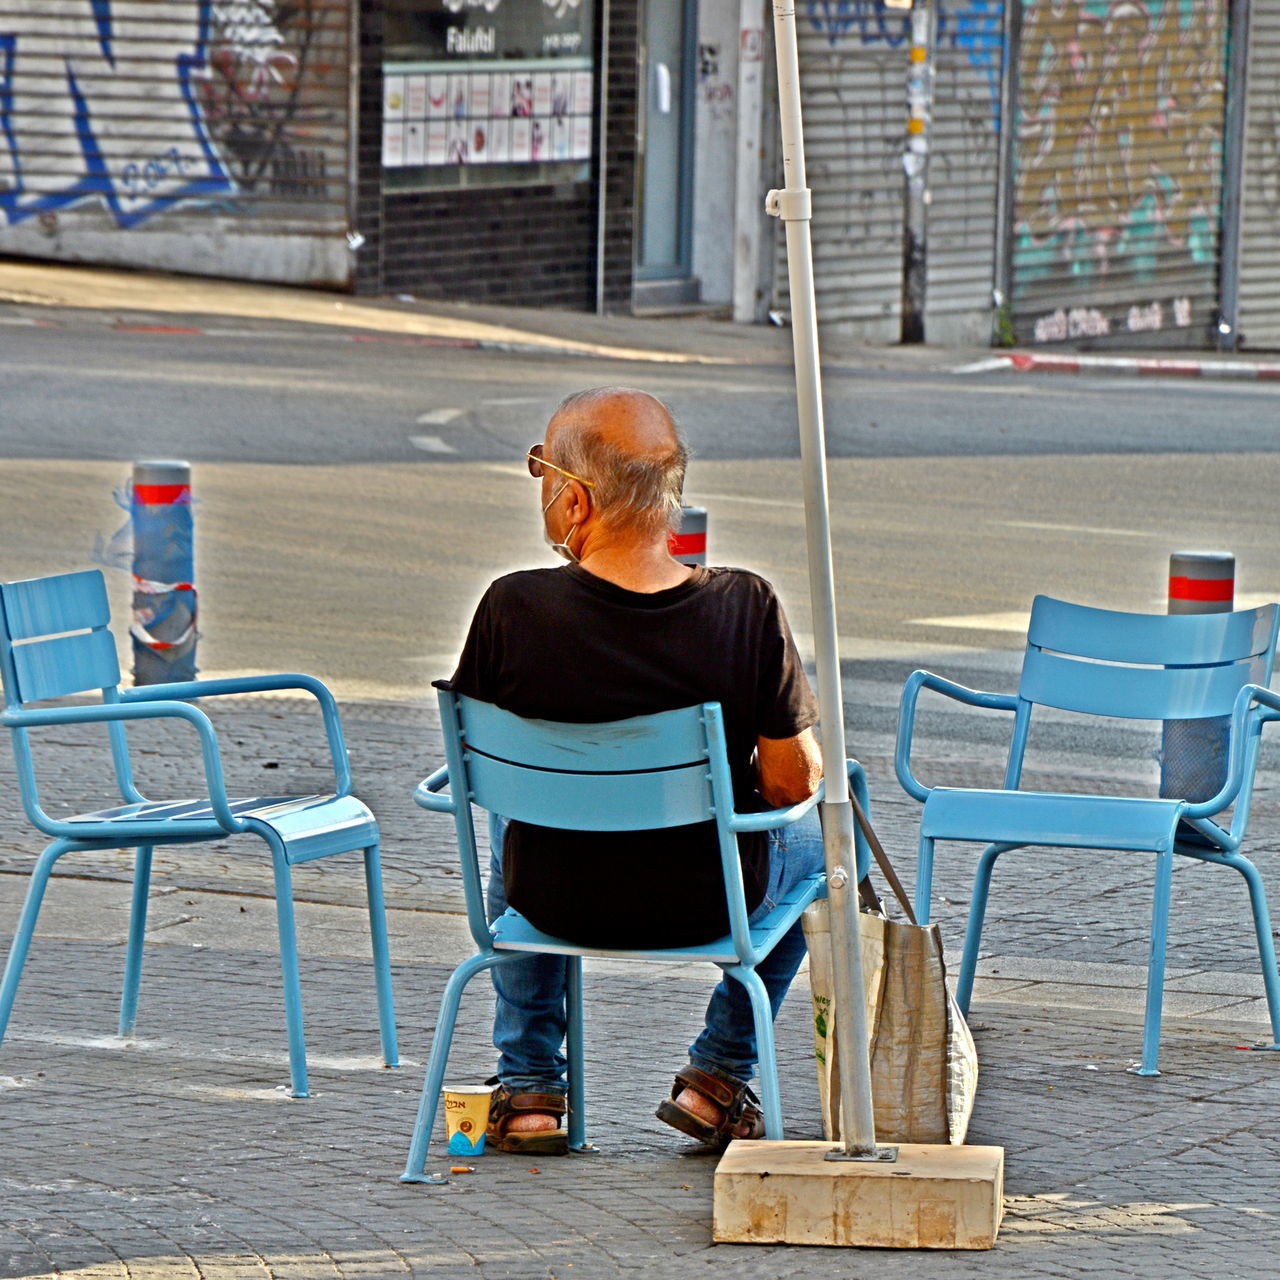 REAR VIEW OF MAN SITTING ON CHAIR AT TABLE IN CITY